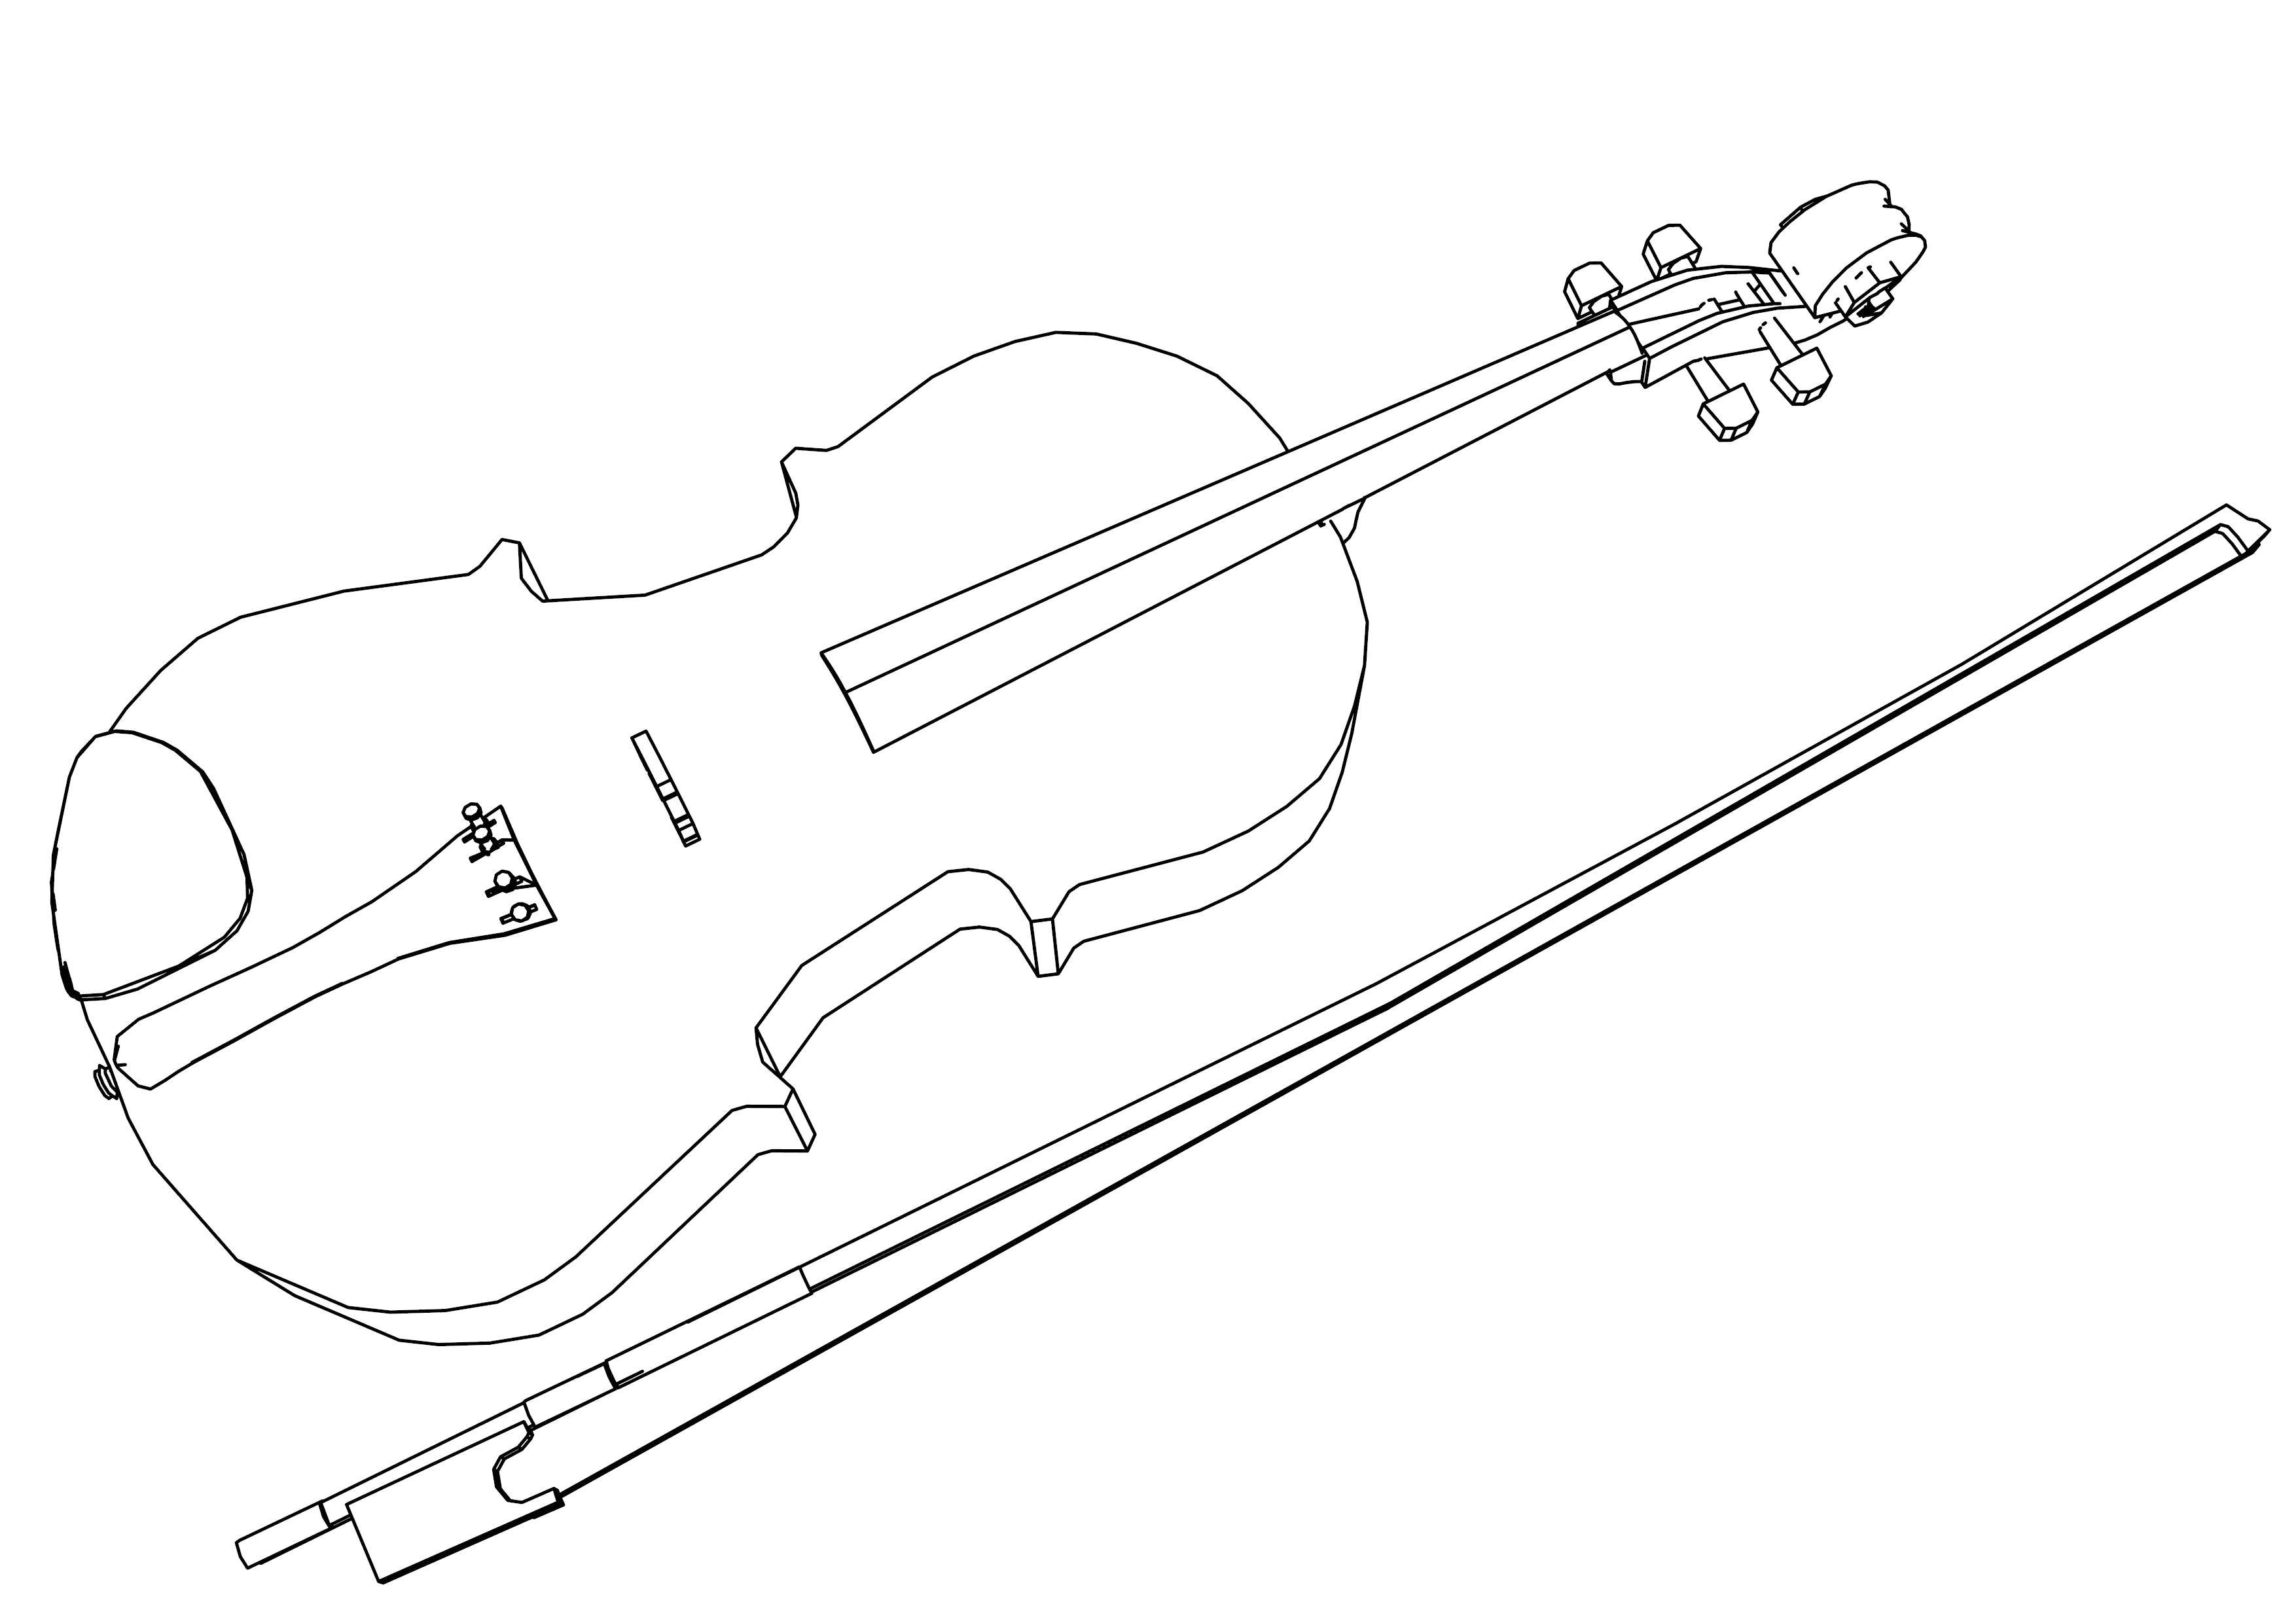 Coloring Violin. Category Music. Tags:  Music, instrument, musician, note.